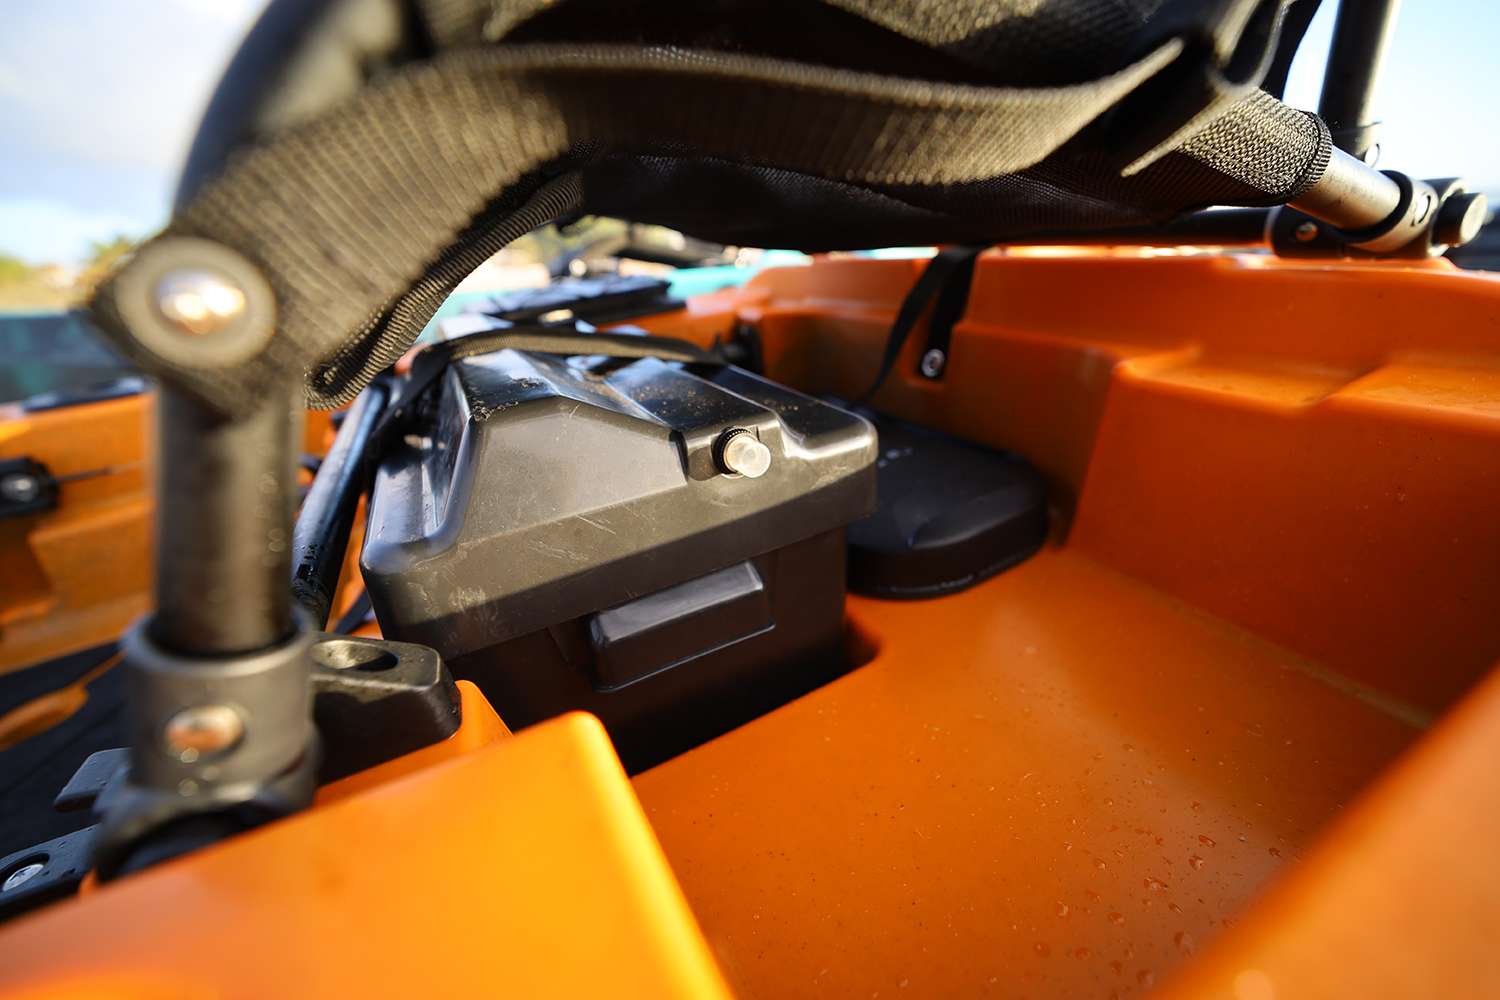 Beneath the seat is where the battery is stored.The Minn Kota trolling motor runs on a 12-volt system, either lead acid or lithium. Both options will run for hours providing all-day power.